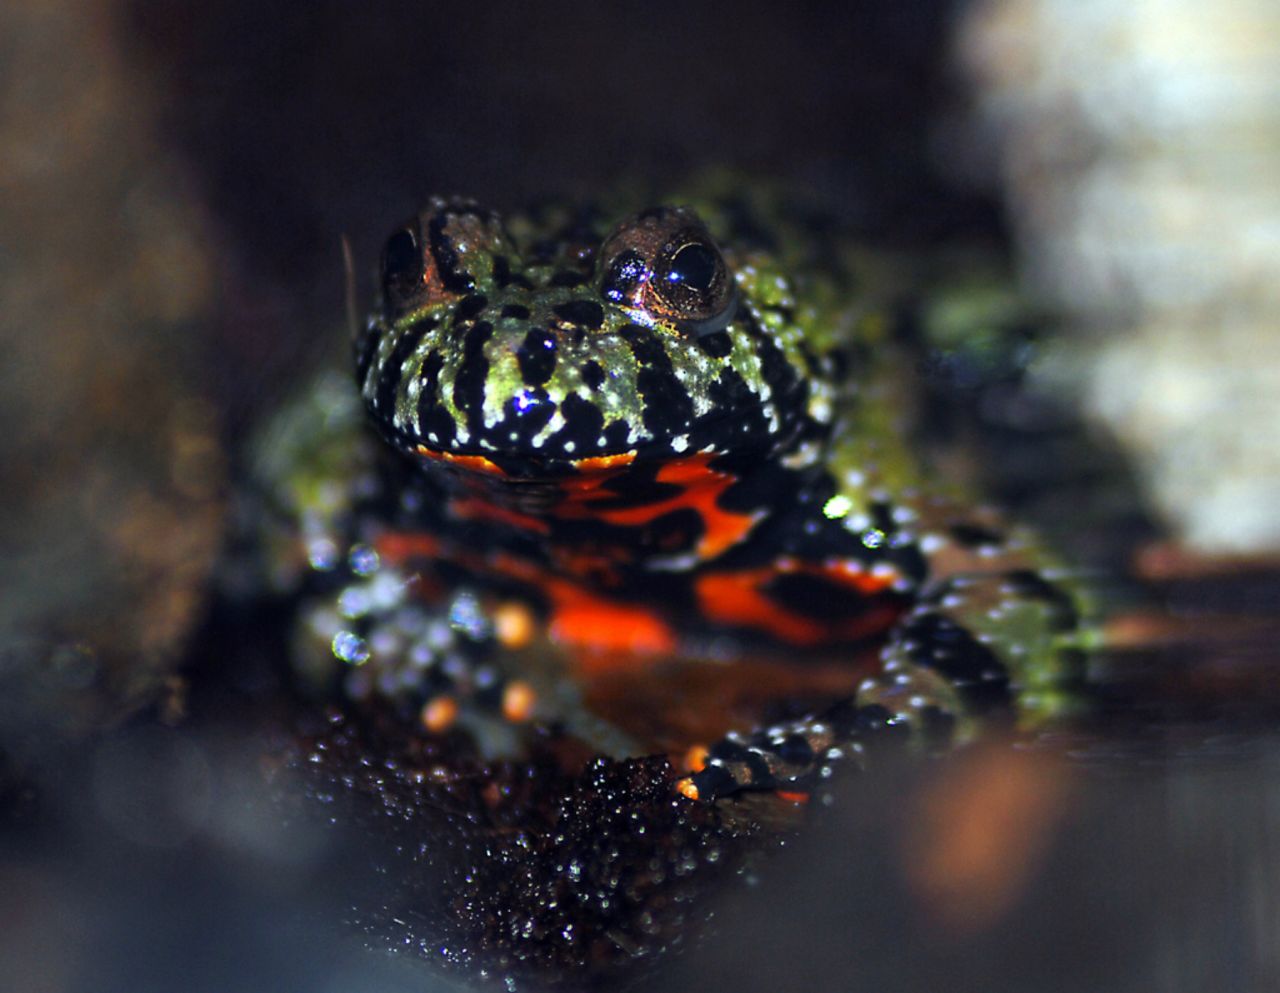 The venom of the fire-bellied toad has been in trials to develop drugs to help image and identify prostate cancer in patients.